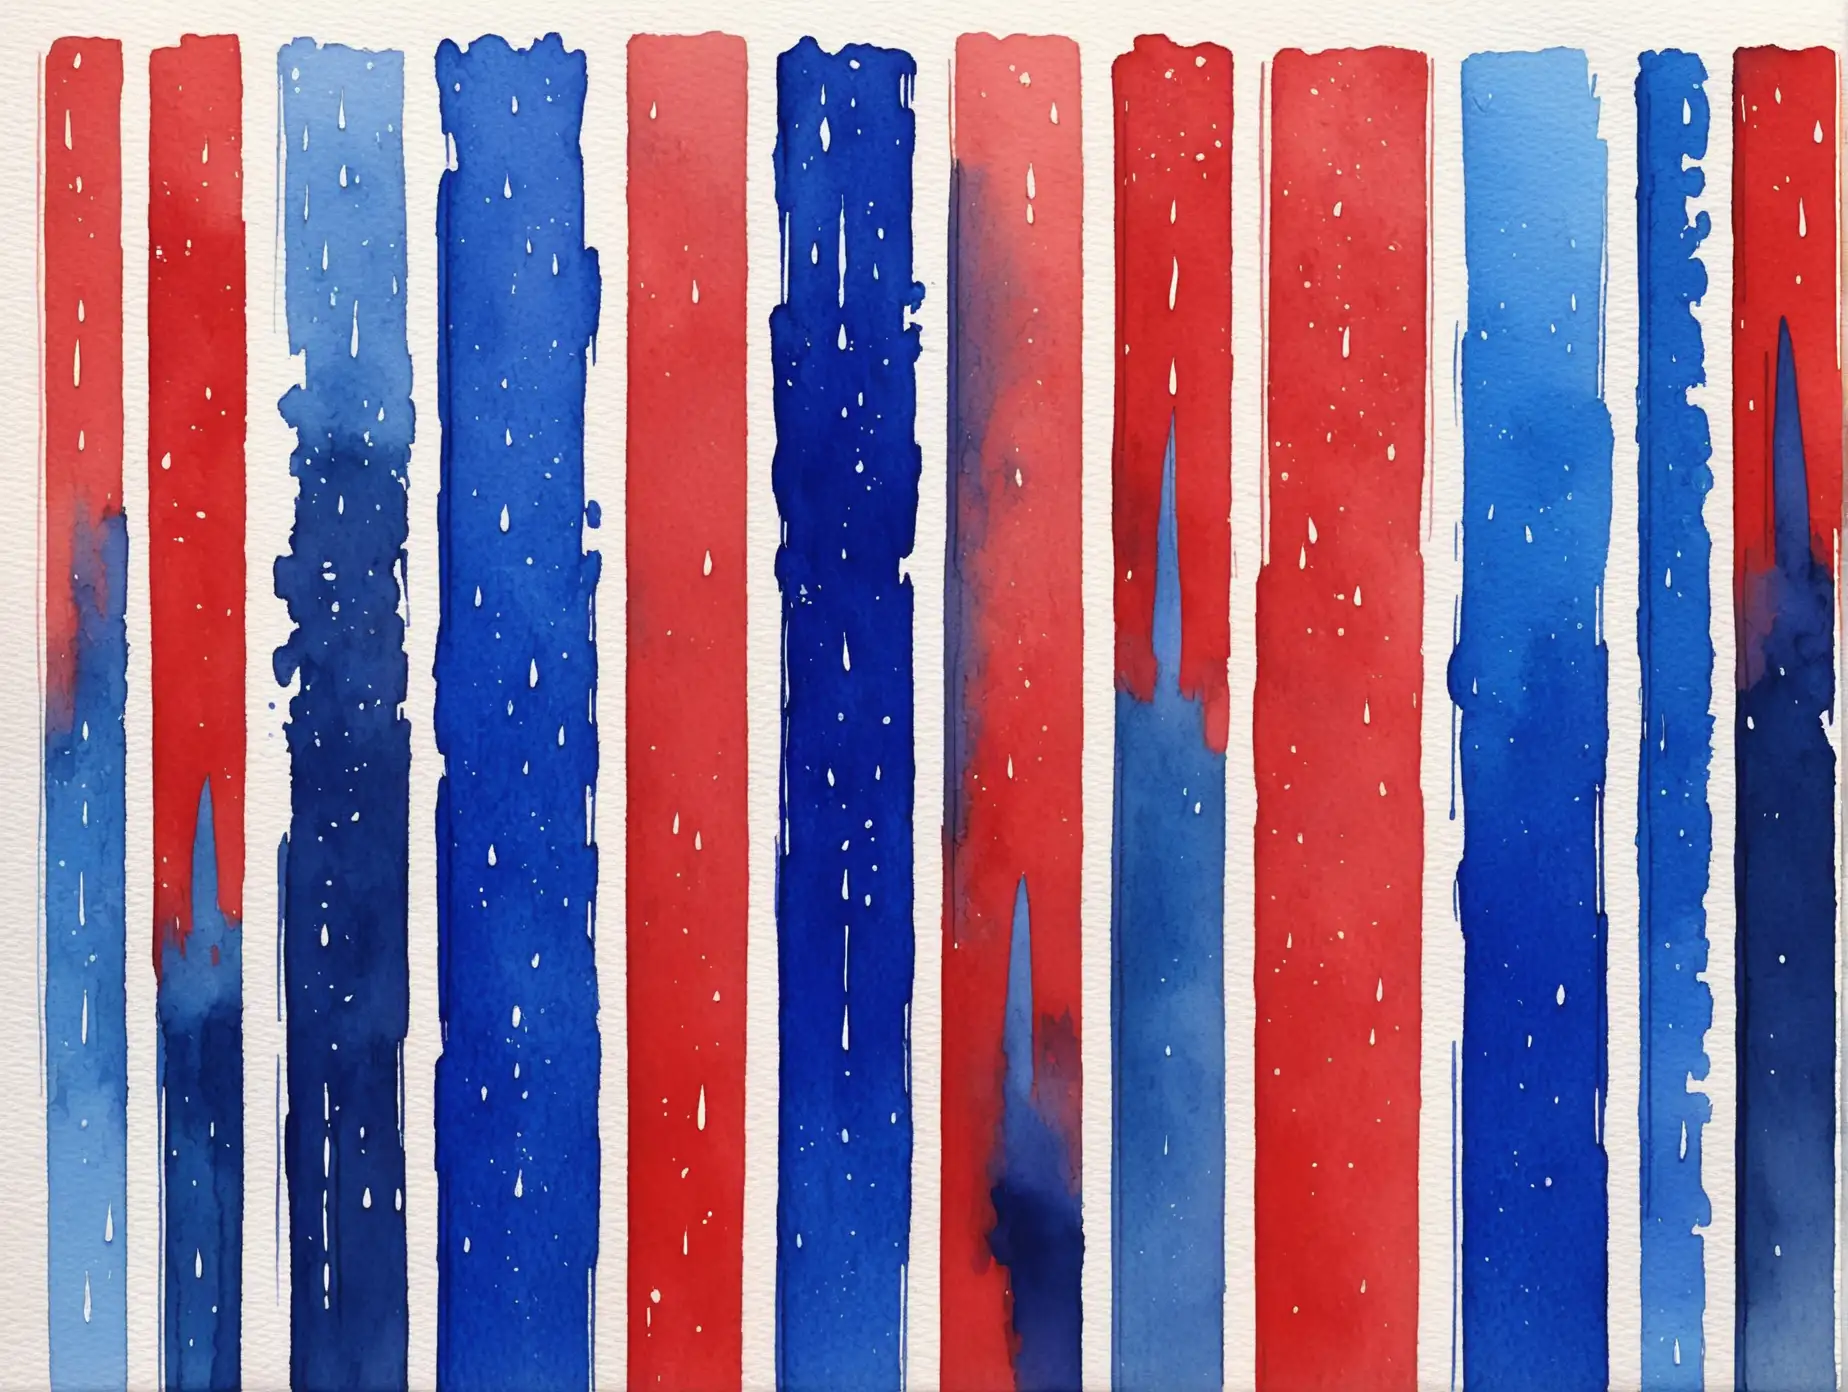 water color painting of vertical brush strokes side by side, navy blue, cobalt blue, red, sky blue, very wet brush with lots of texture